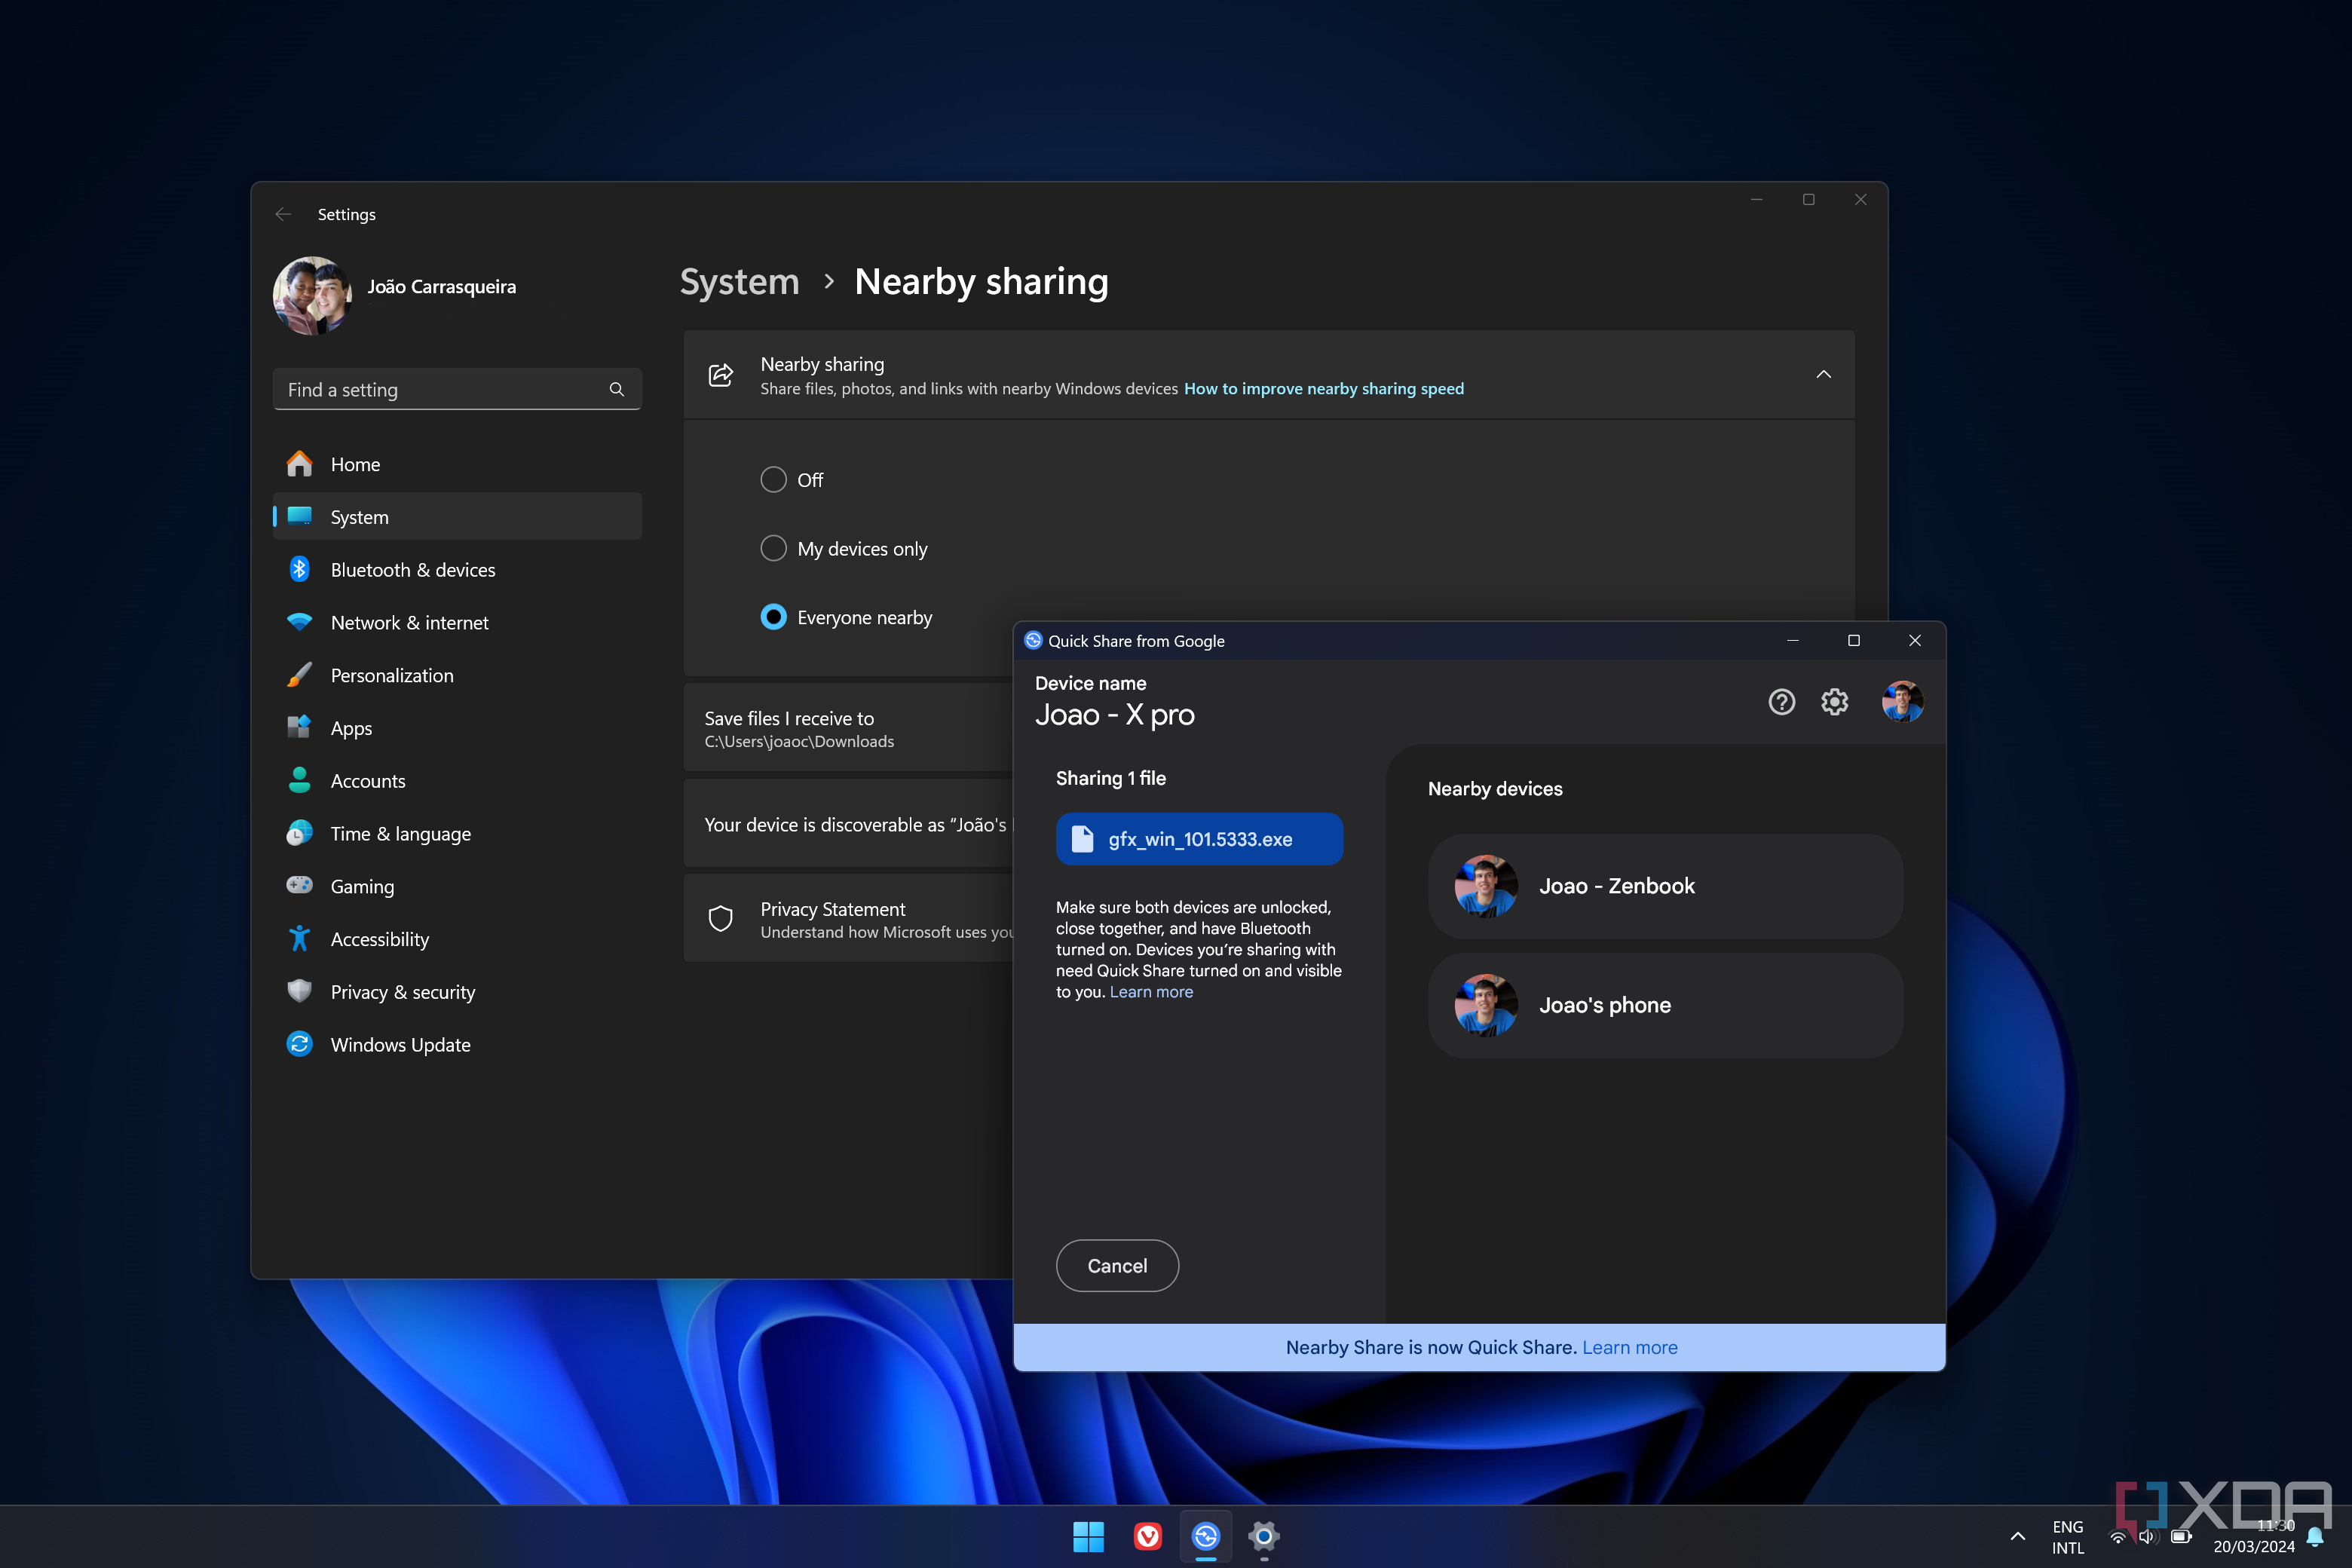 Screenshot of QUick Share for Windows and Nearby Sharing settings open side by side